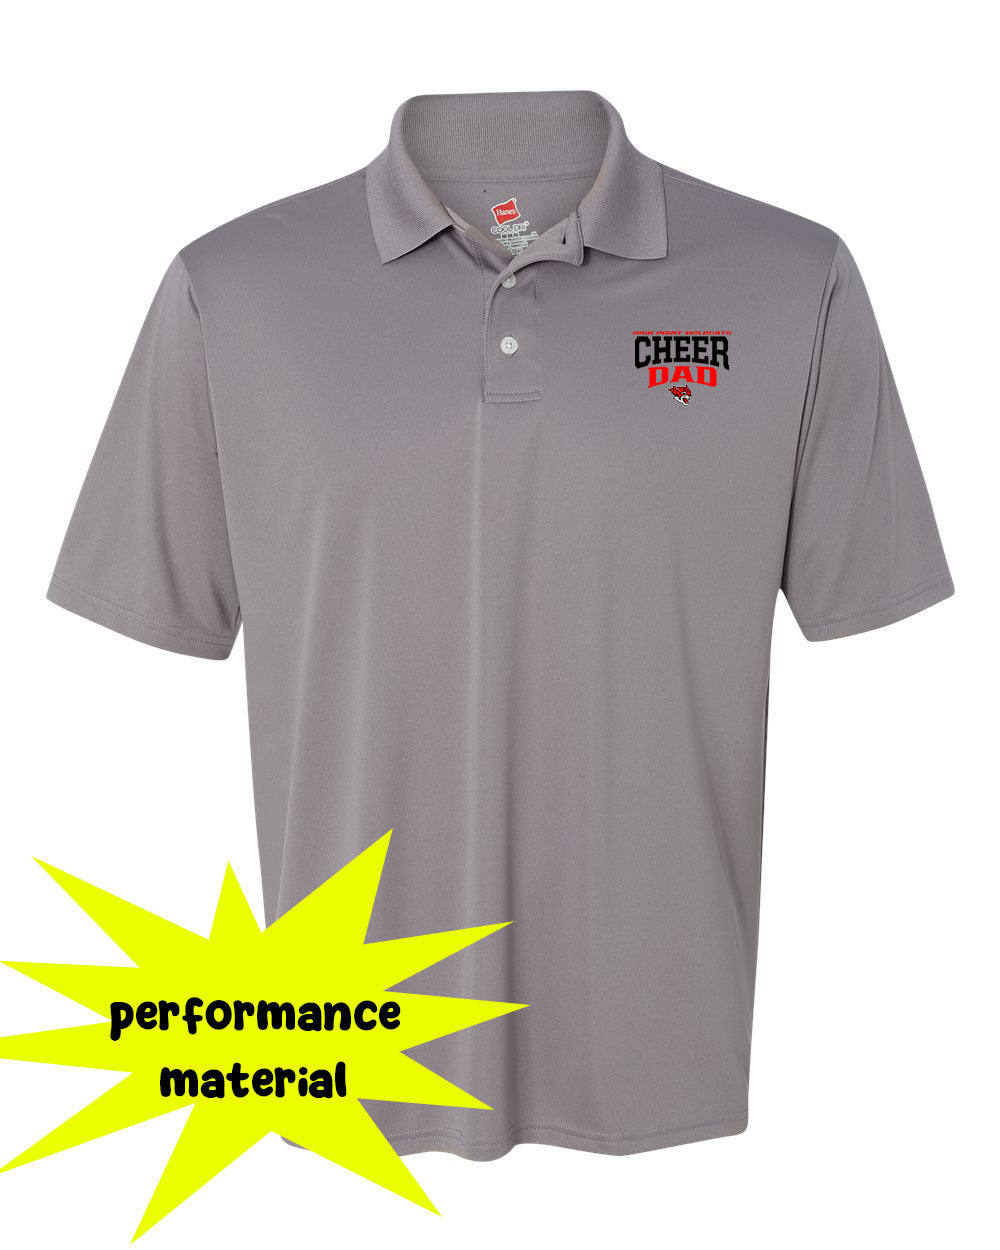 Wildcats Cheer Design 6 Performance Material Polo T-Shirt